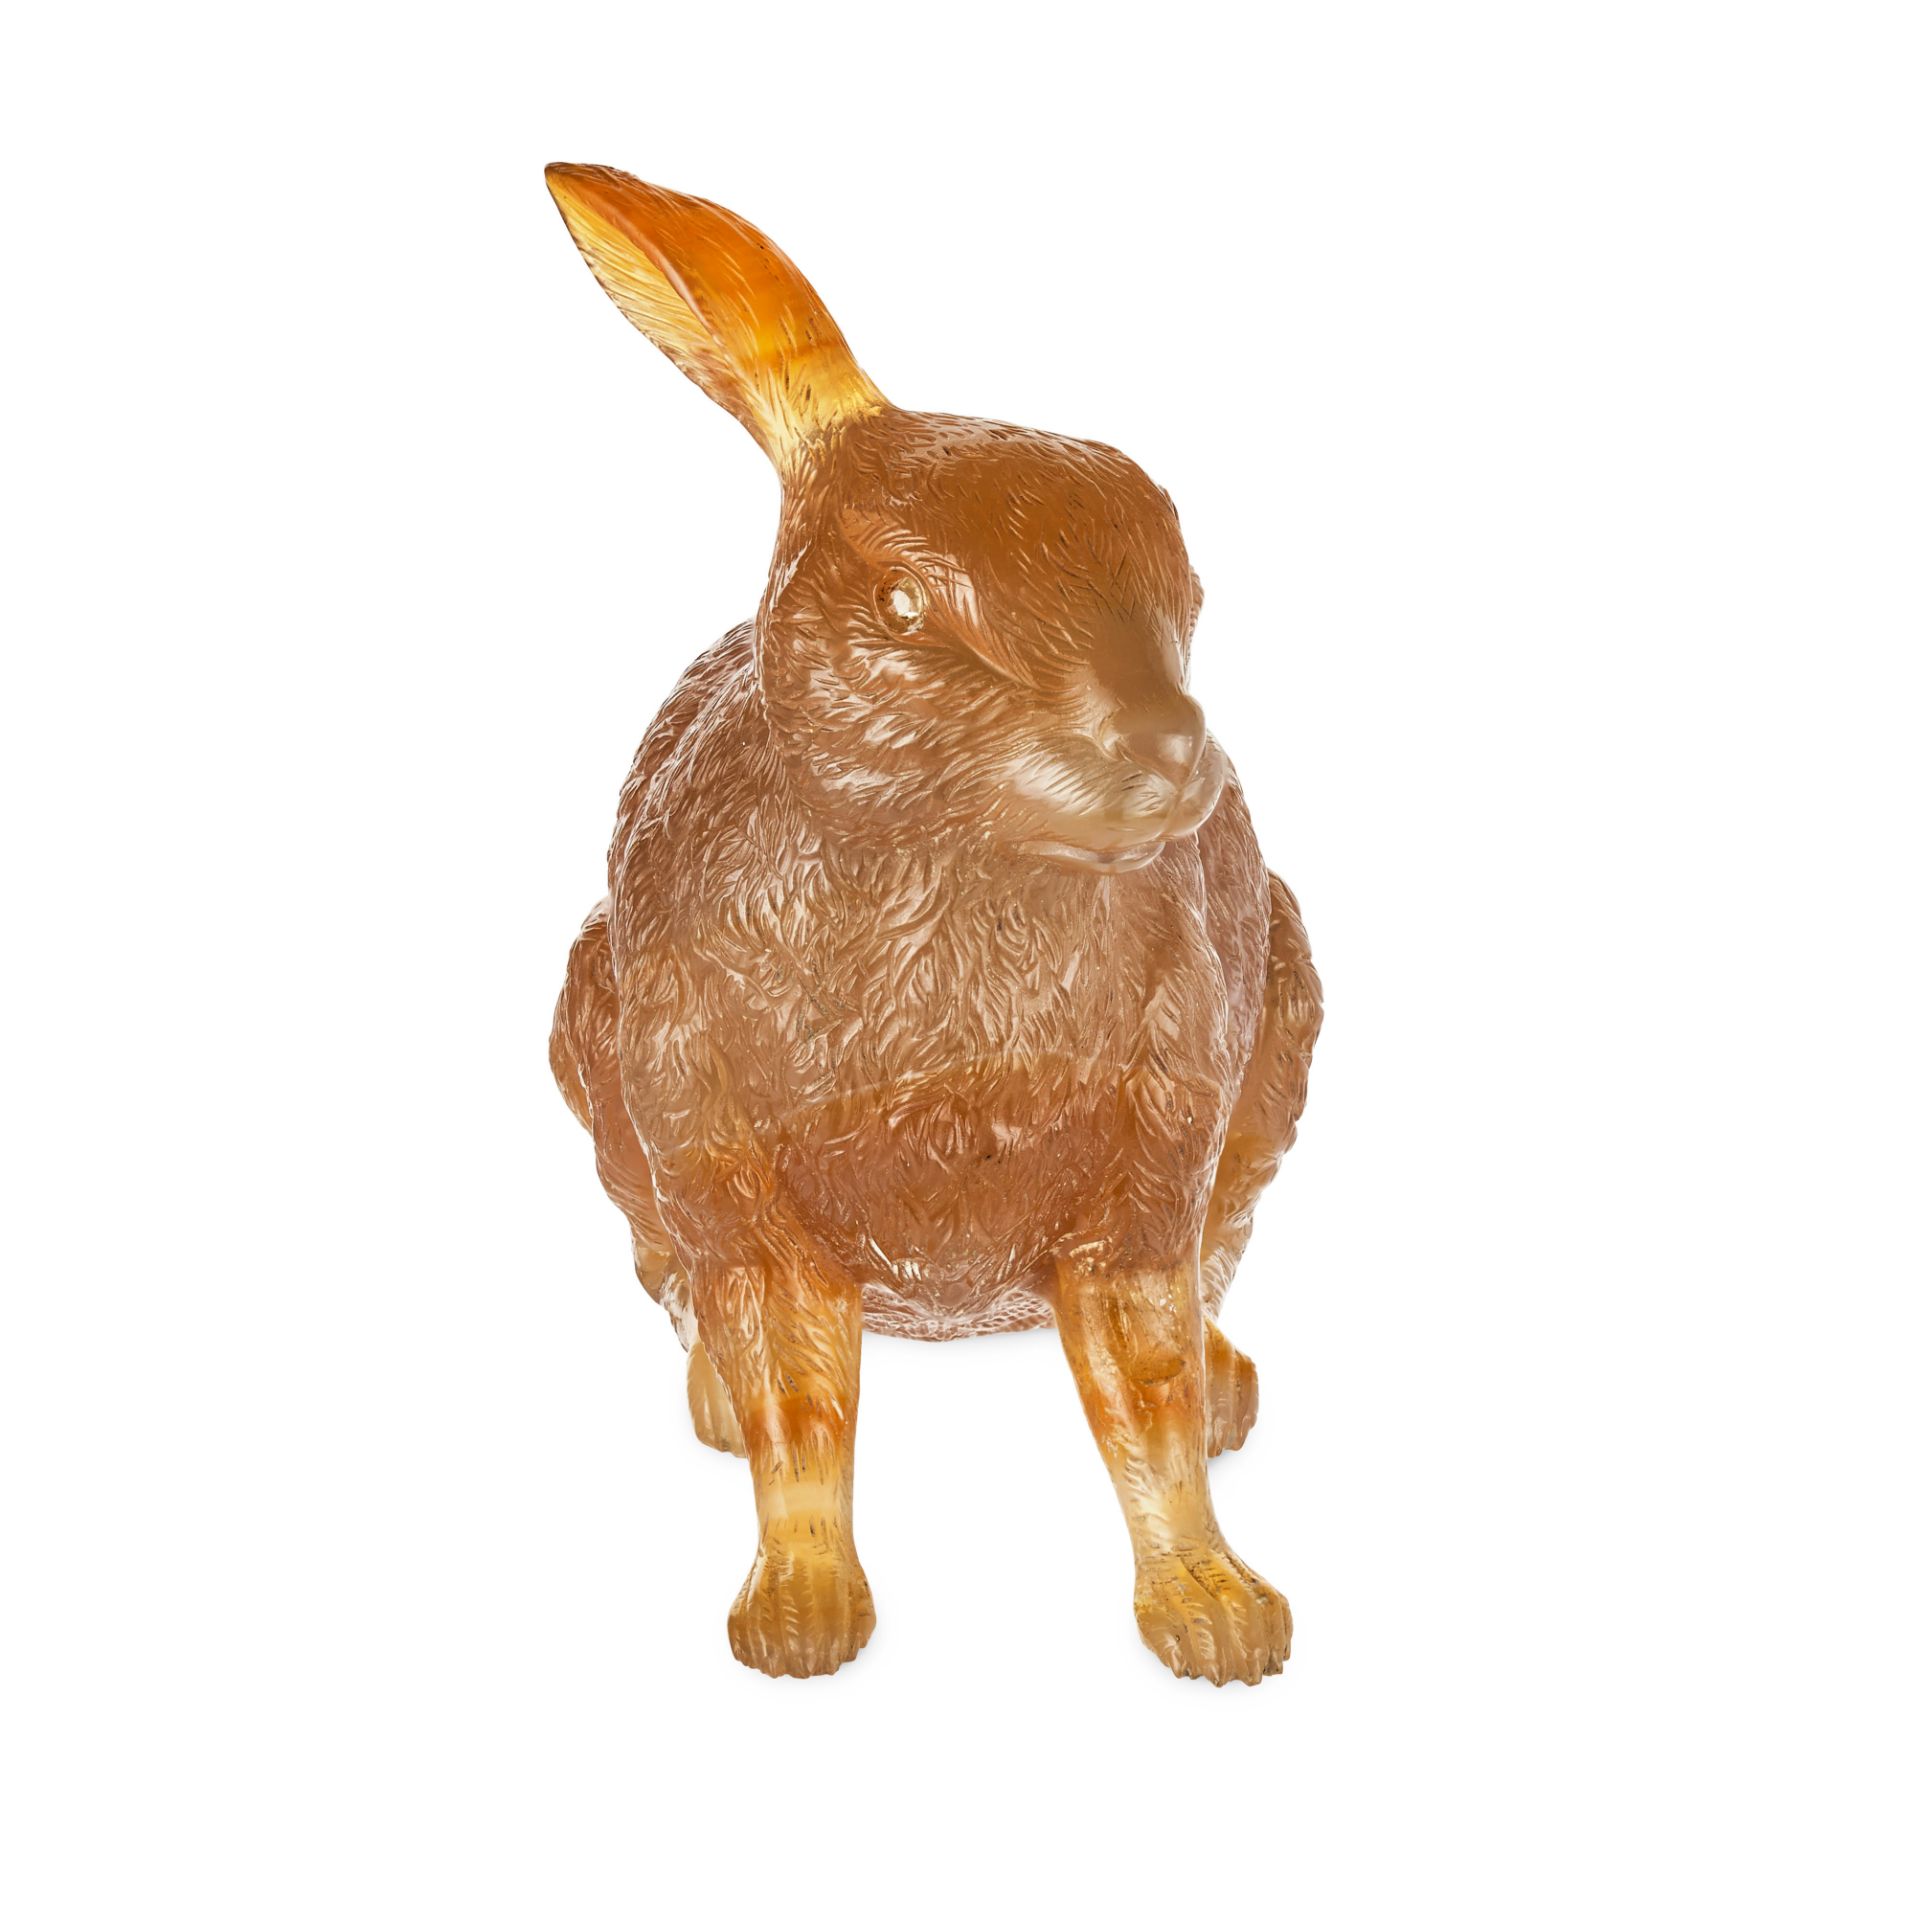 FABERGE, A JEWELLED AGATE FIGURE OF A HARE / LEVERETT, ST PETERSBURG, CIRCA 1900 - Image 8 of 10